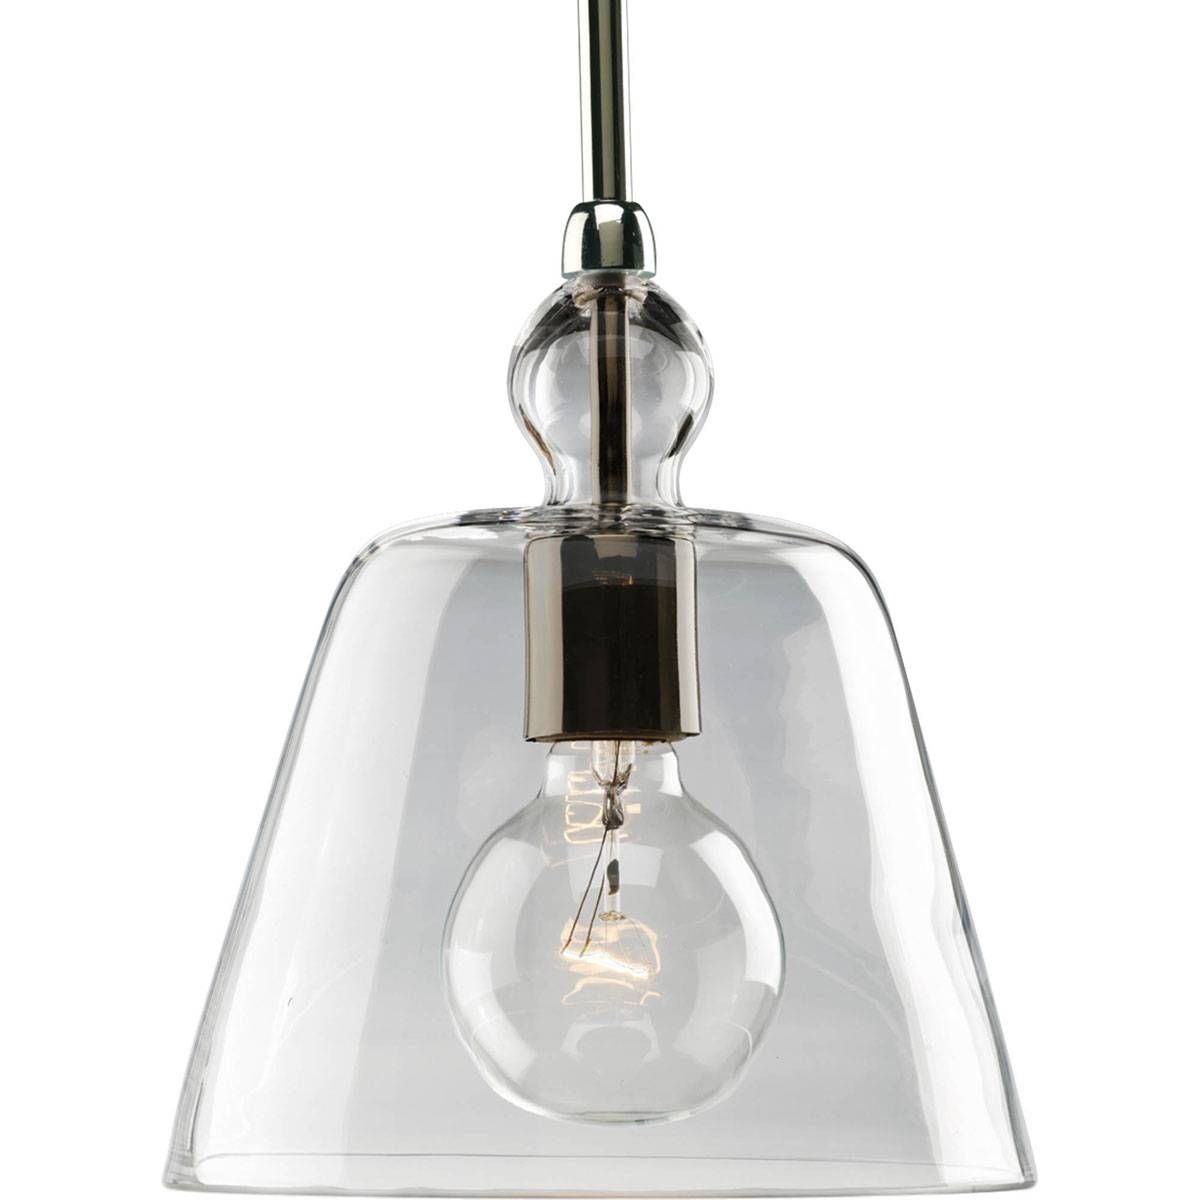 Awesome Battery Operated Pendant Light Fixtures 44 On Hanging Within Battery Operated Hanging Lights (View 9 of 15)